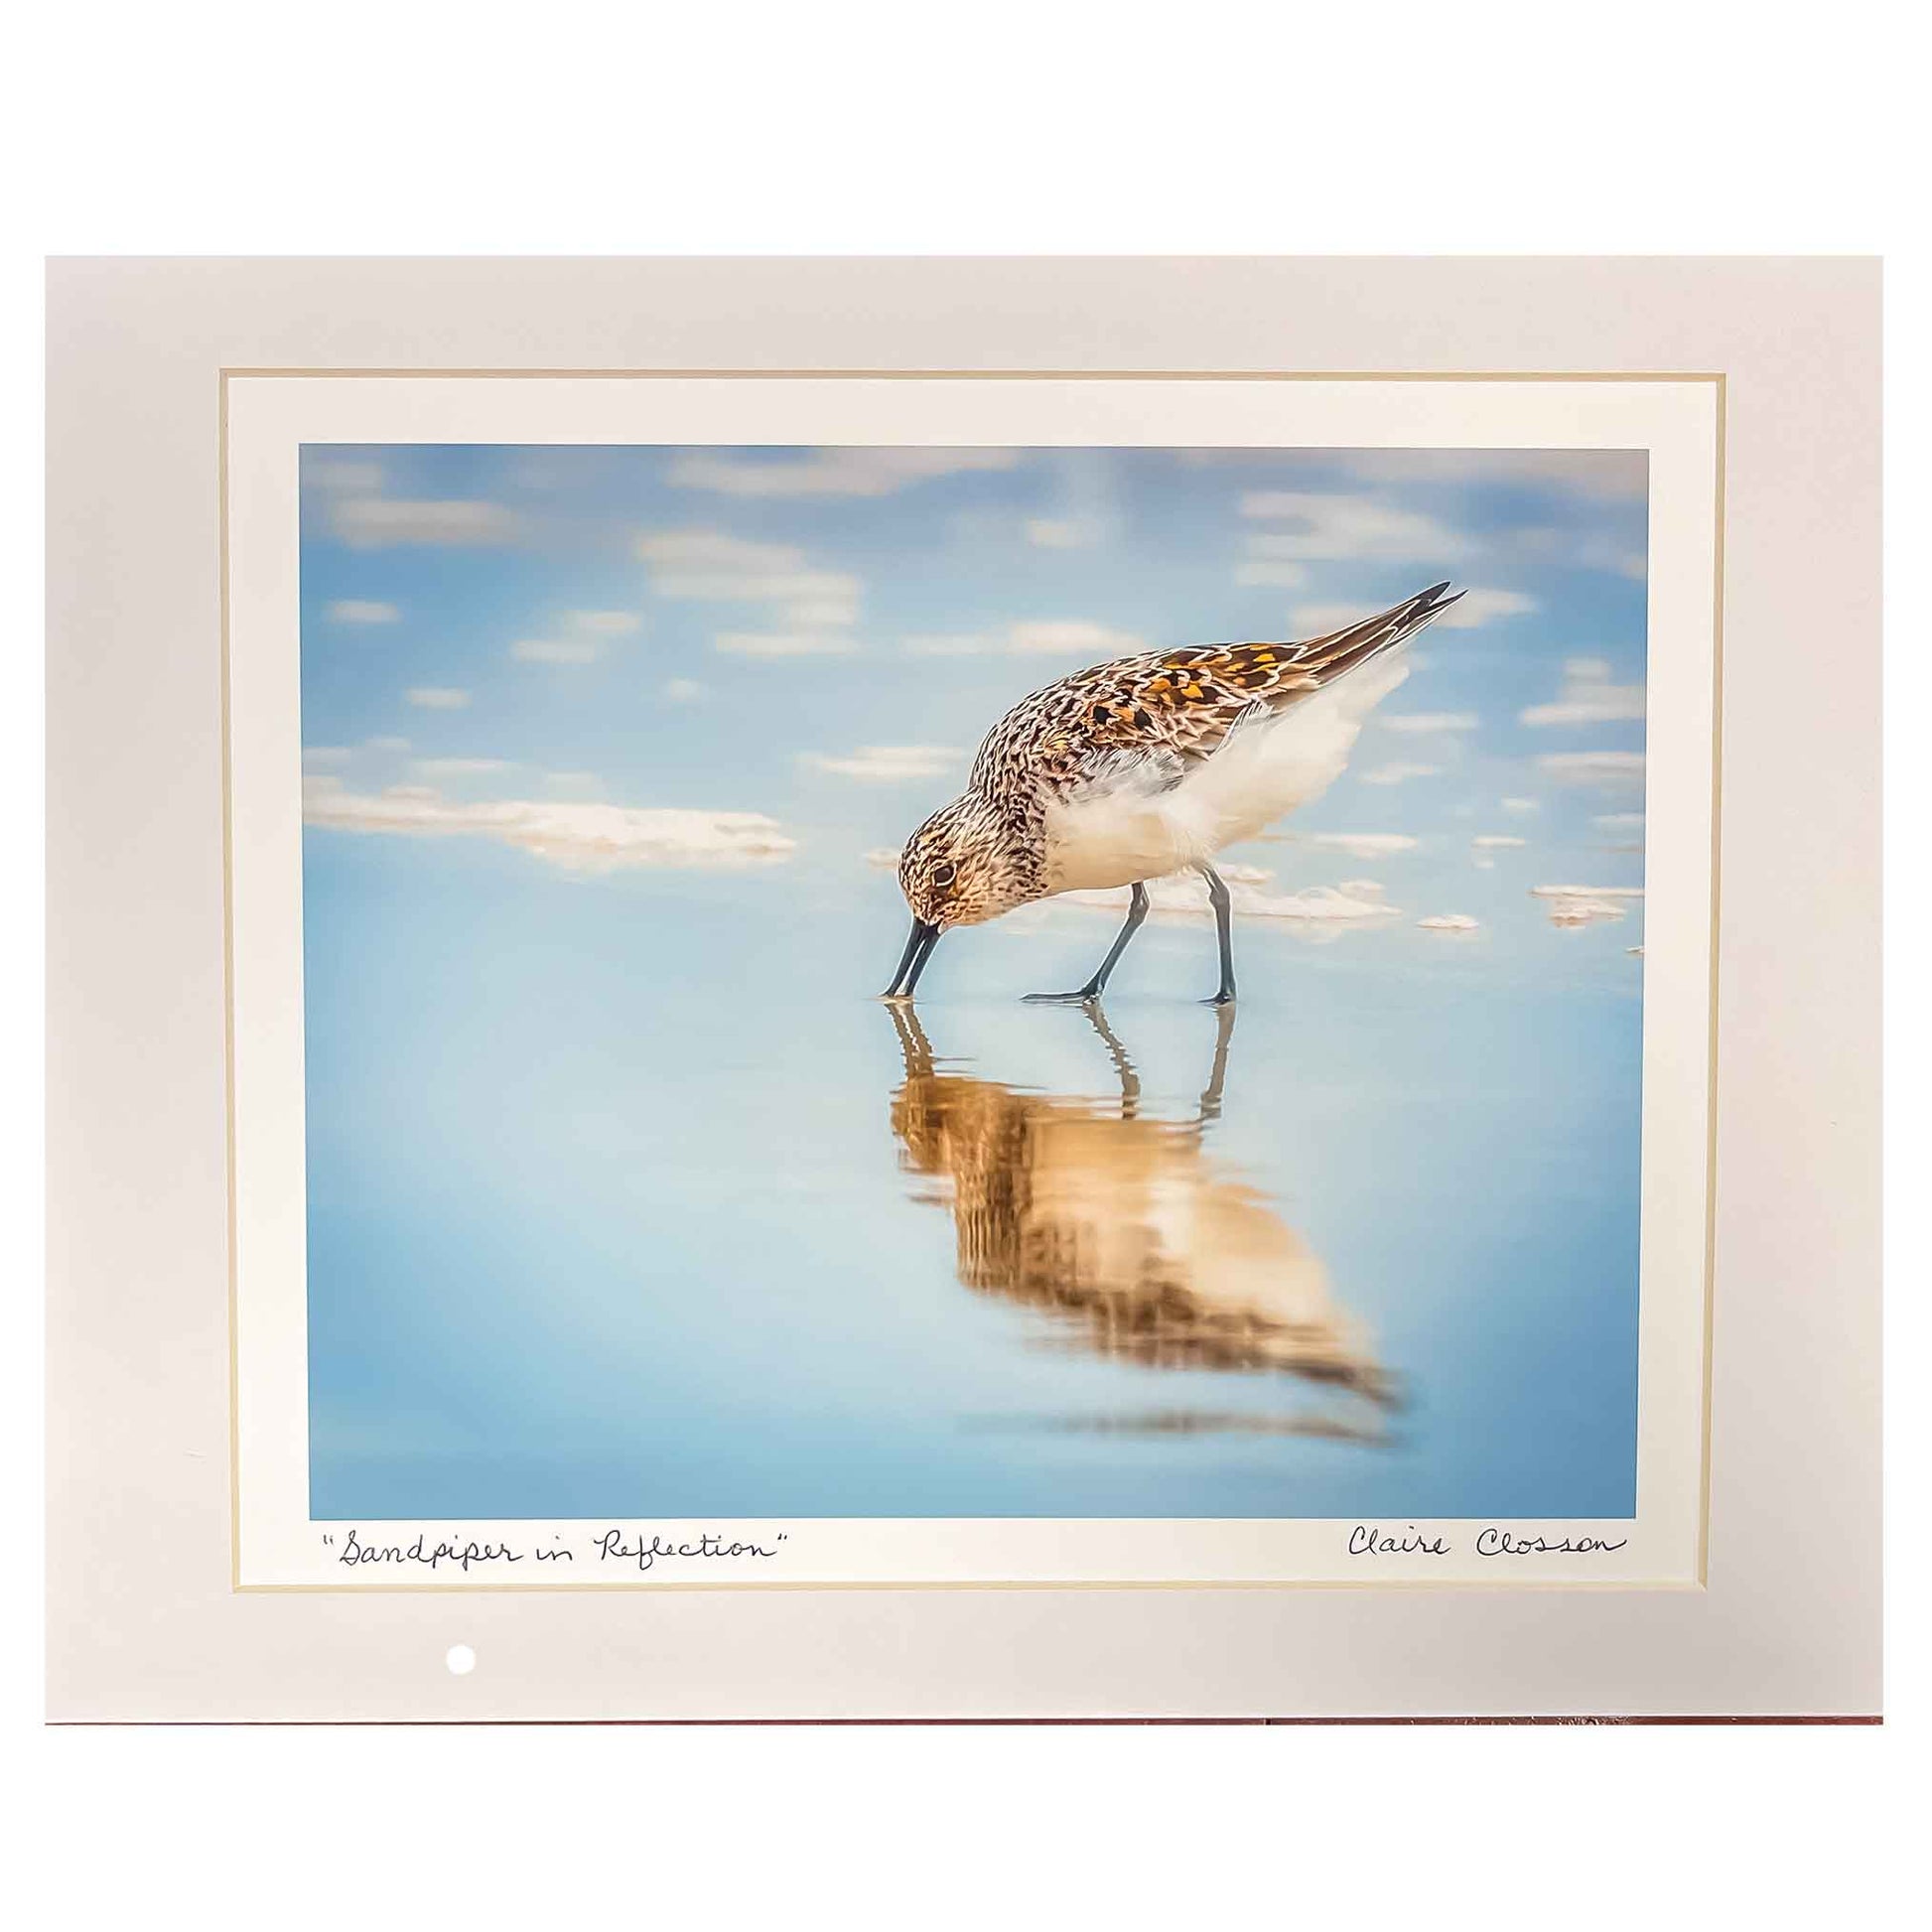 ECC “Sandpiper in Reflection” Matted Print of an Original Photograph by Claire Closson. Stunning photo of a Florida shorebird, a Sand Piper. Reflected in the calm water a serene photograph. Wild bird photography. Pale blue sky with soft clouds serve as a backdrop for this pristine photograph of tis iconic shore bird. Matted to 11 x 14 inches. Ready to be framed.